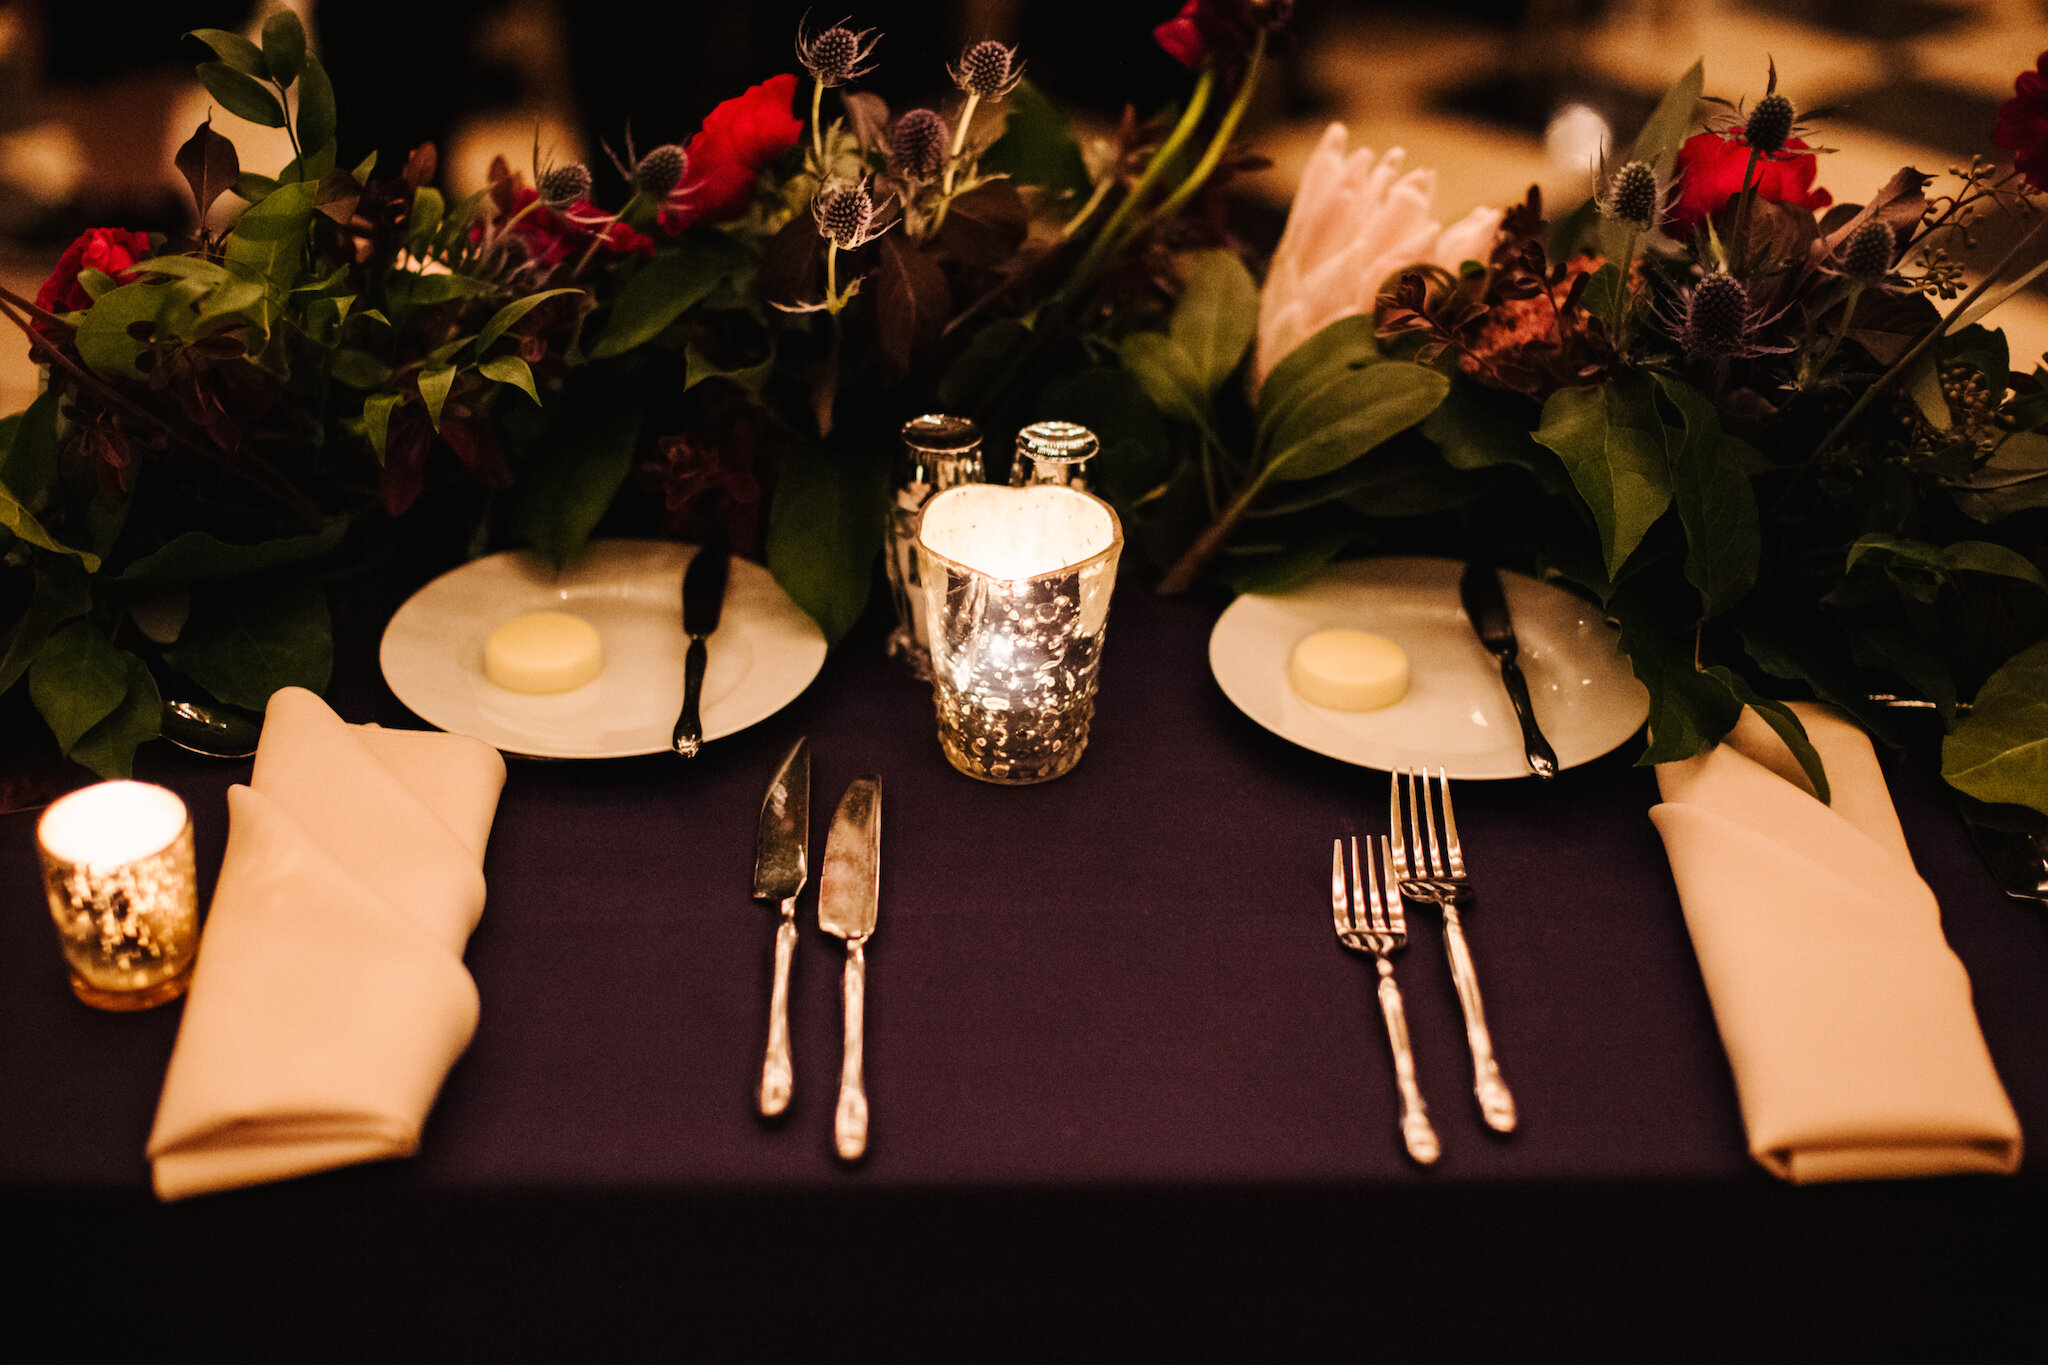 Wedding Place Setting: Elegant Jewel-Toned Wedding captured by Dorey Kronick featured on CHI thee WED